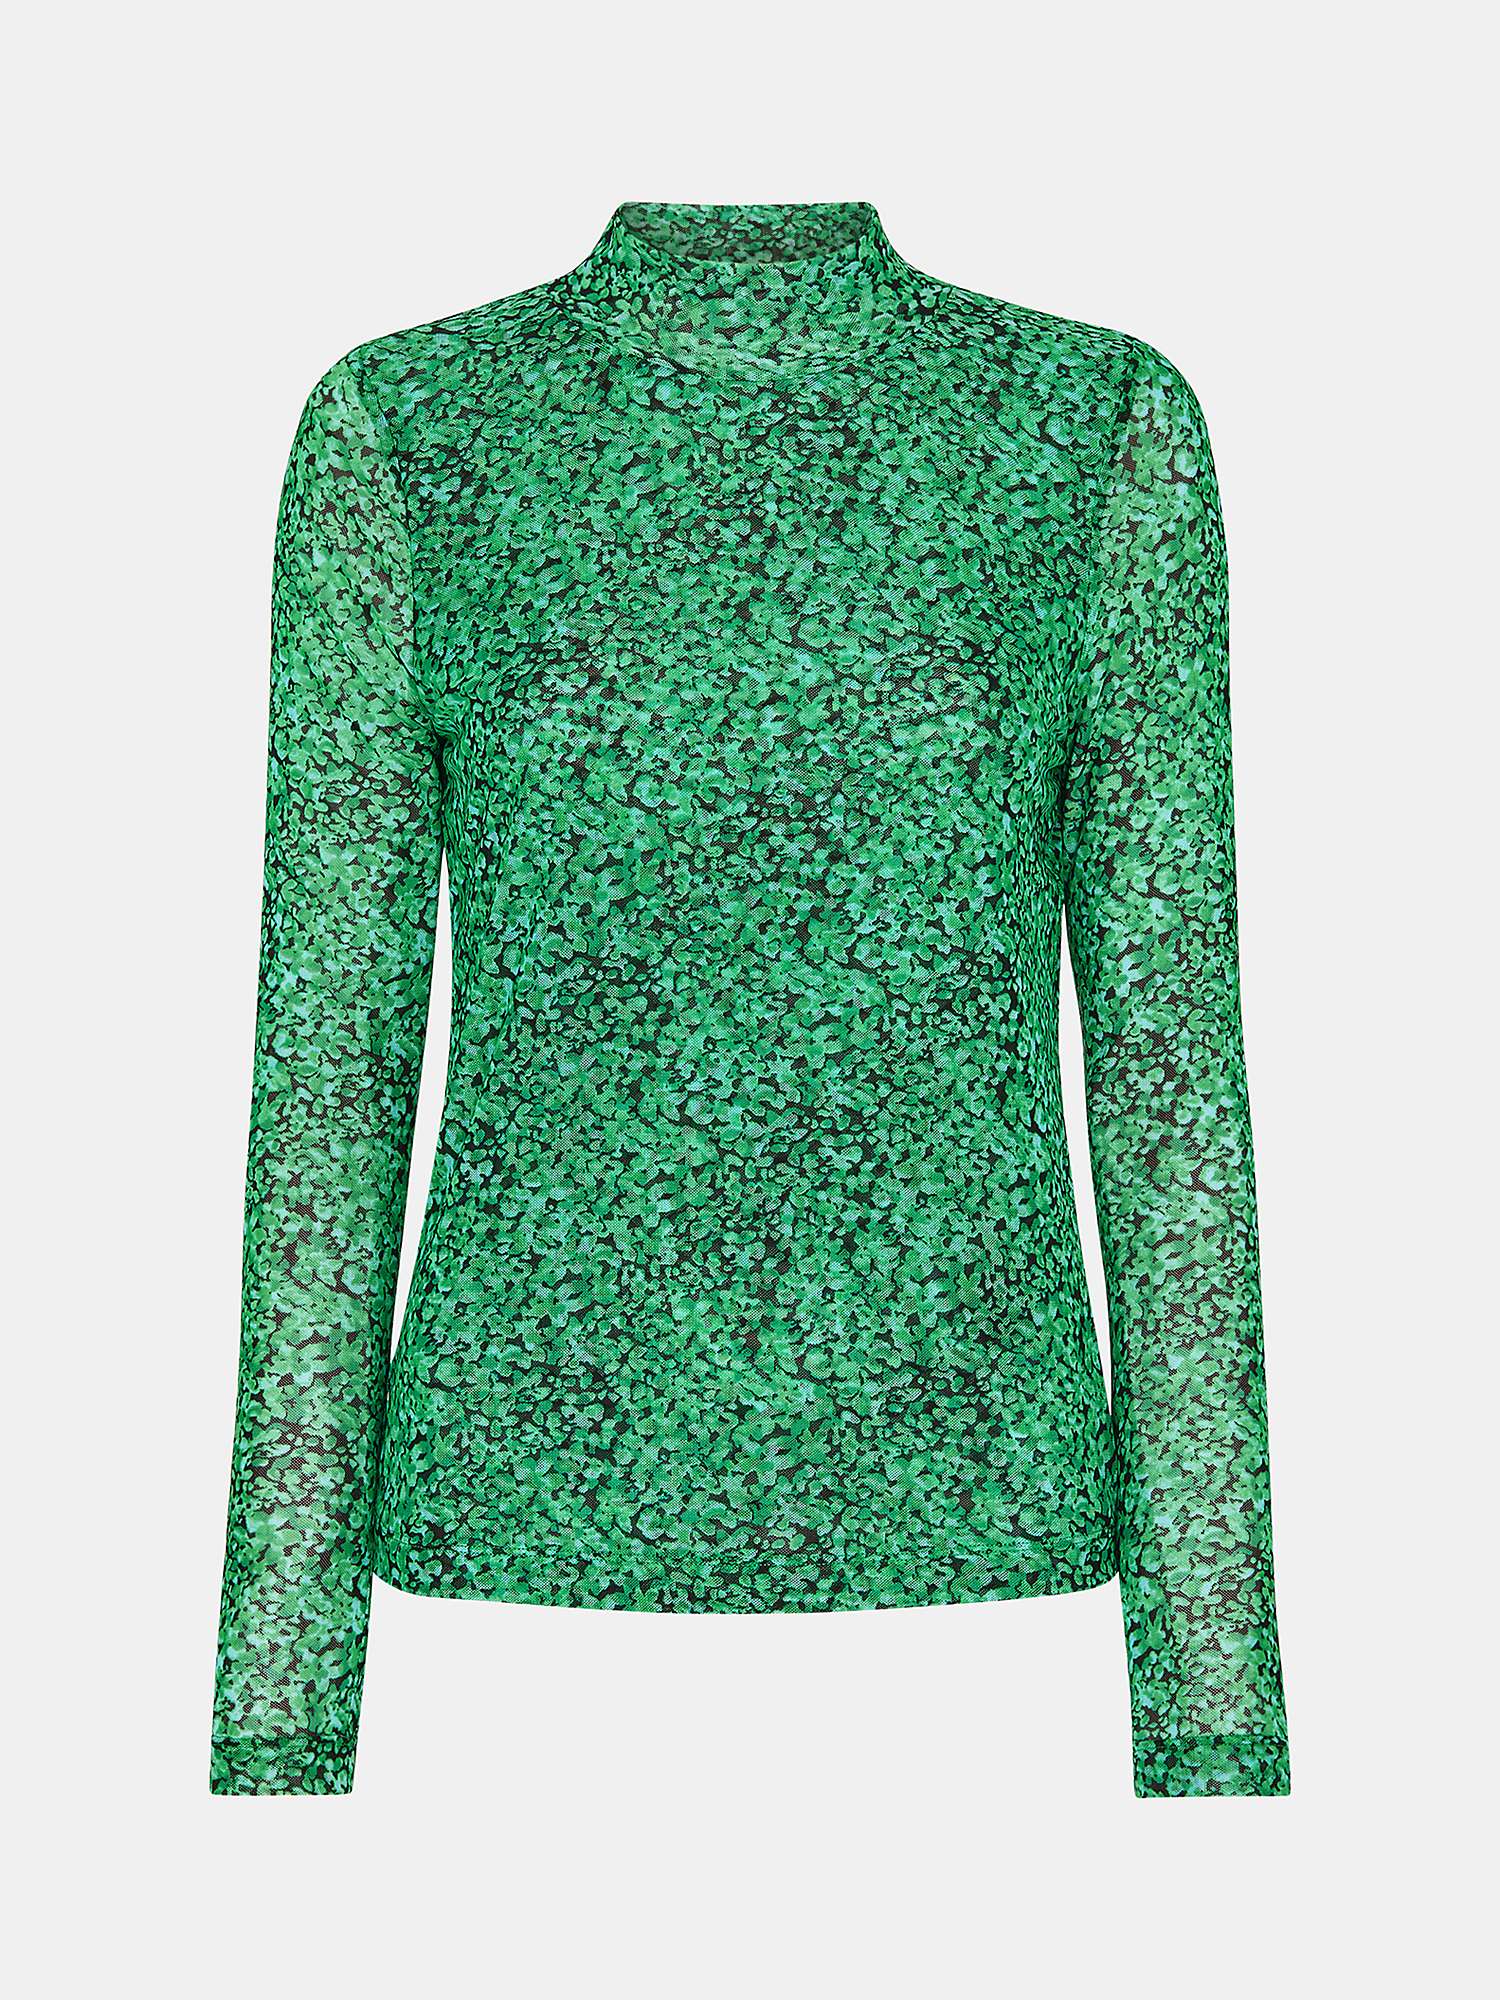 Buy Whistles Floral High Neck Top, Green/Multi Online at johnlewis.com